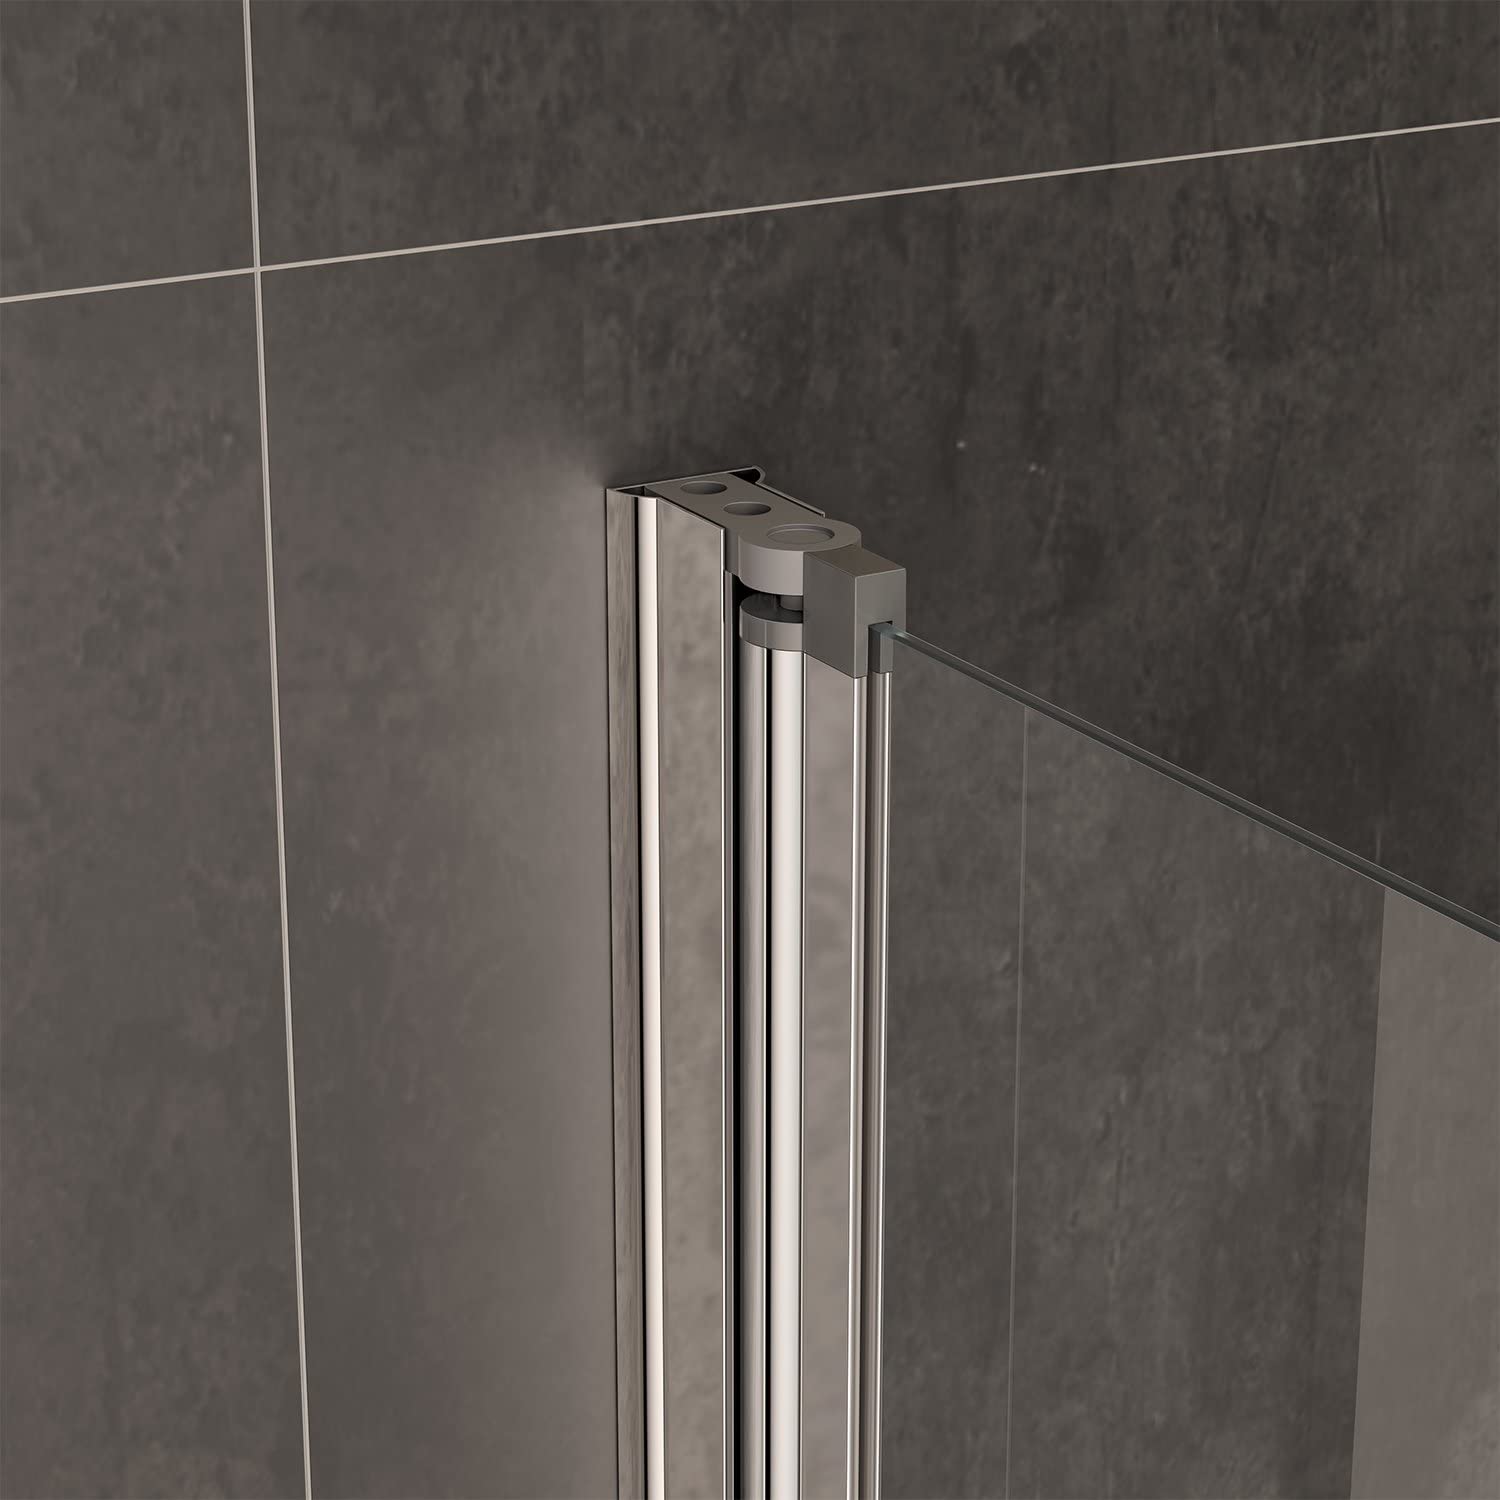 Modern Shower Reversible Bath Screen With Panel And Towel Rail - 1400mm x 1000mm - Chrome